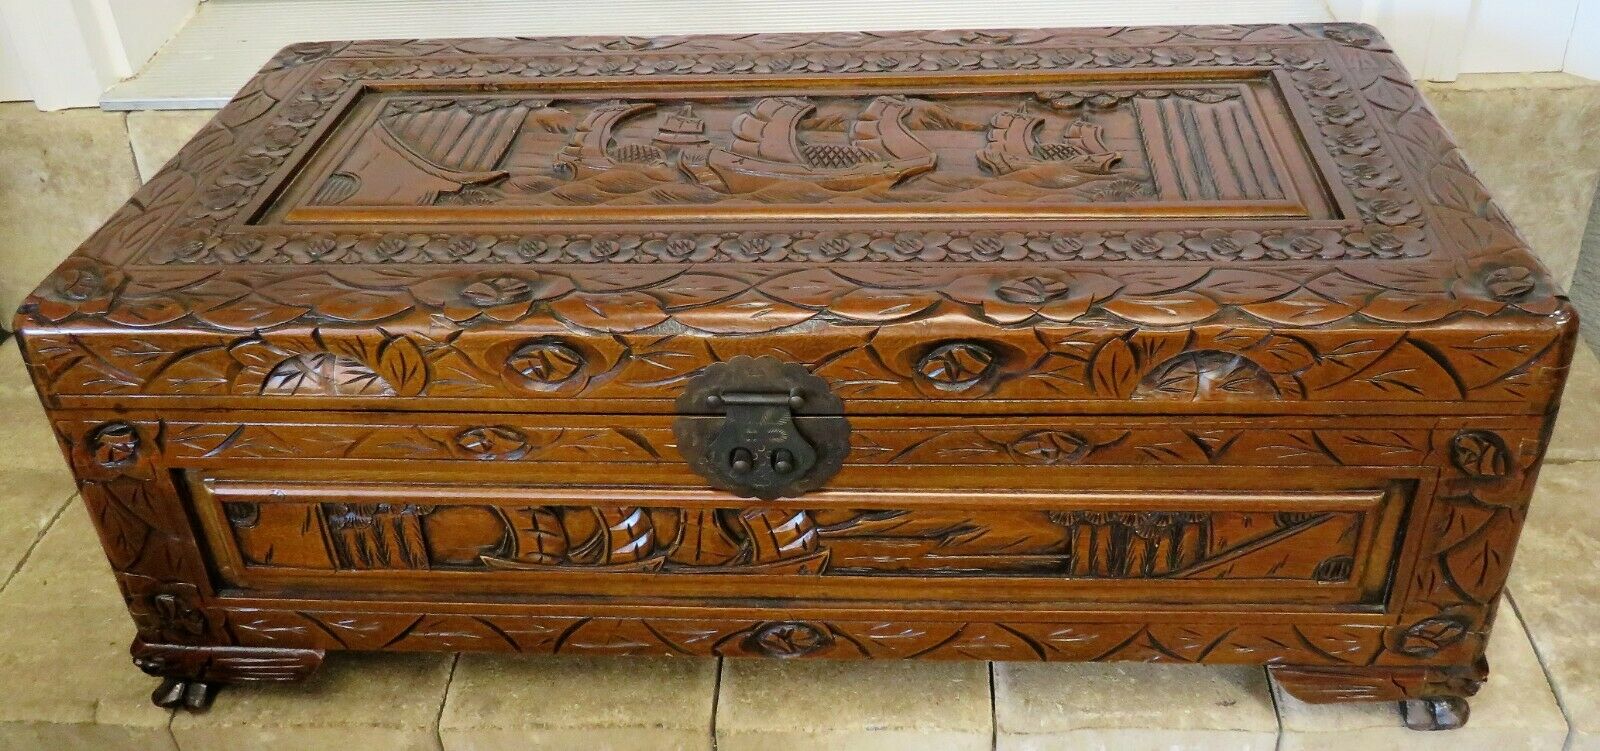 ORIENTAL BEAUTIFUL VINTAGE HAND CARVED WOOD ORNATE TRUNK/CHEST